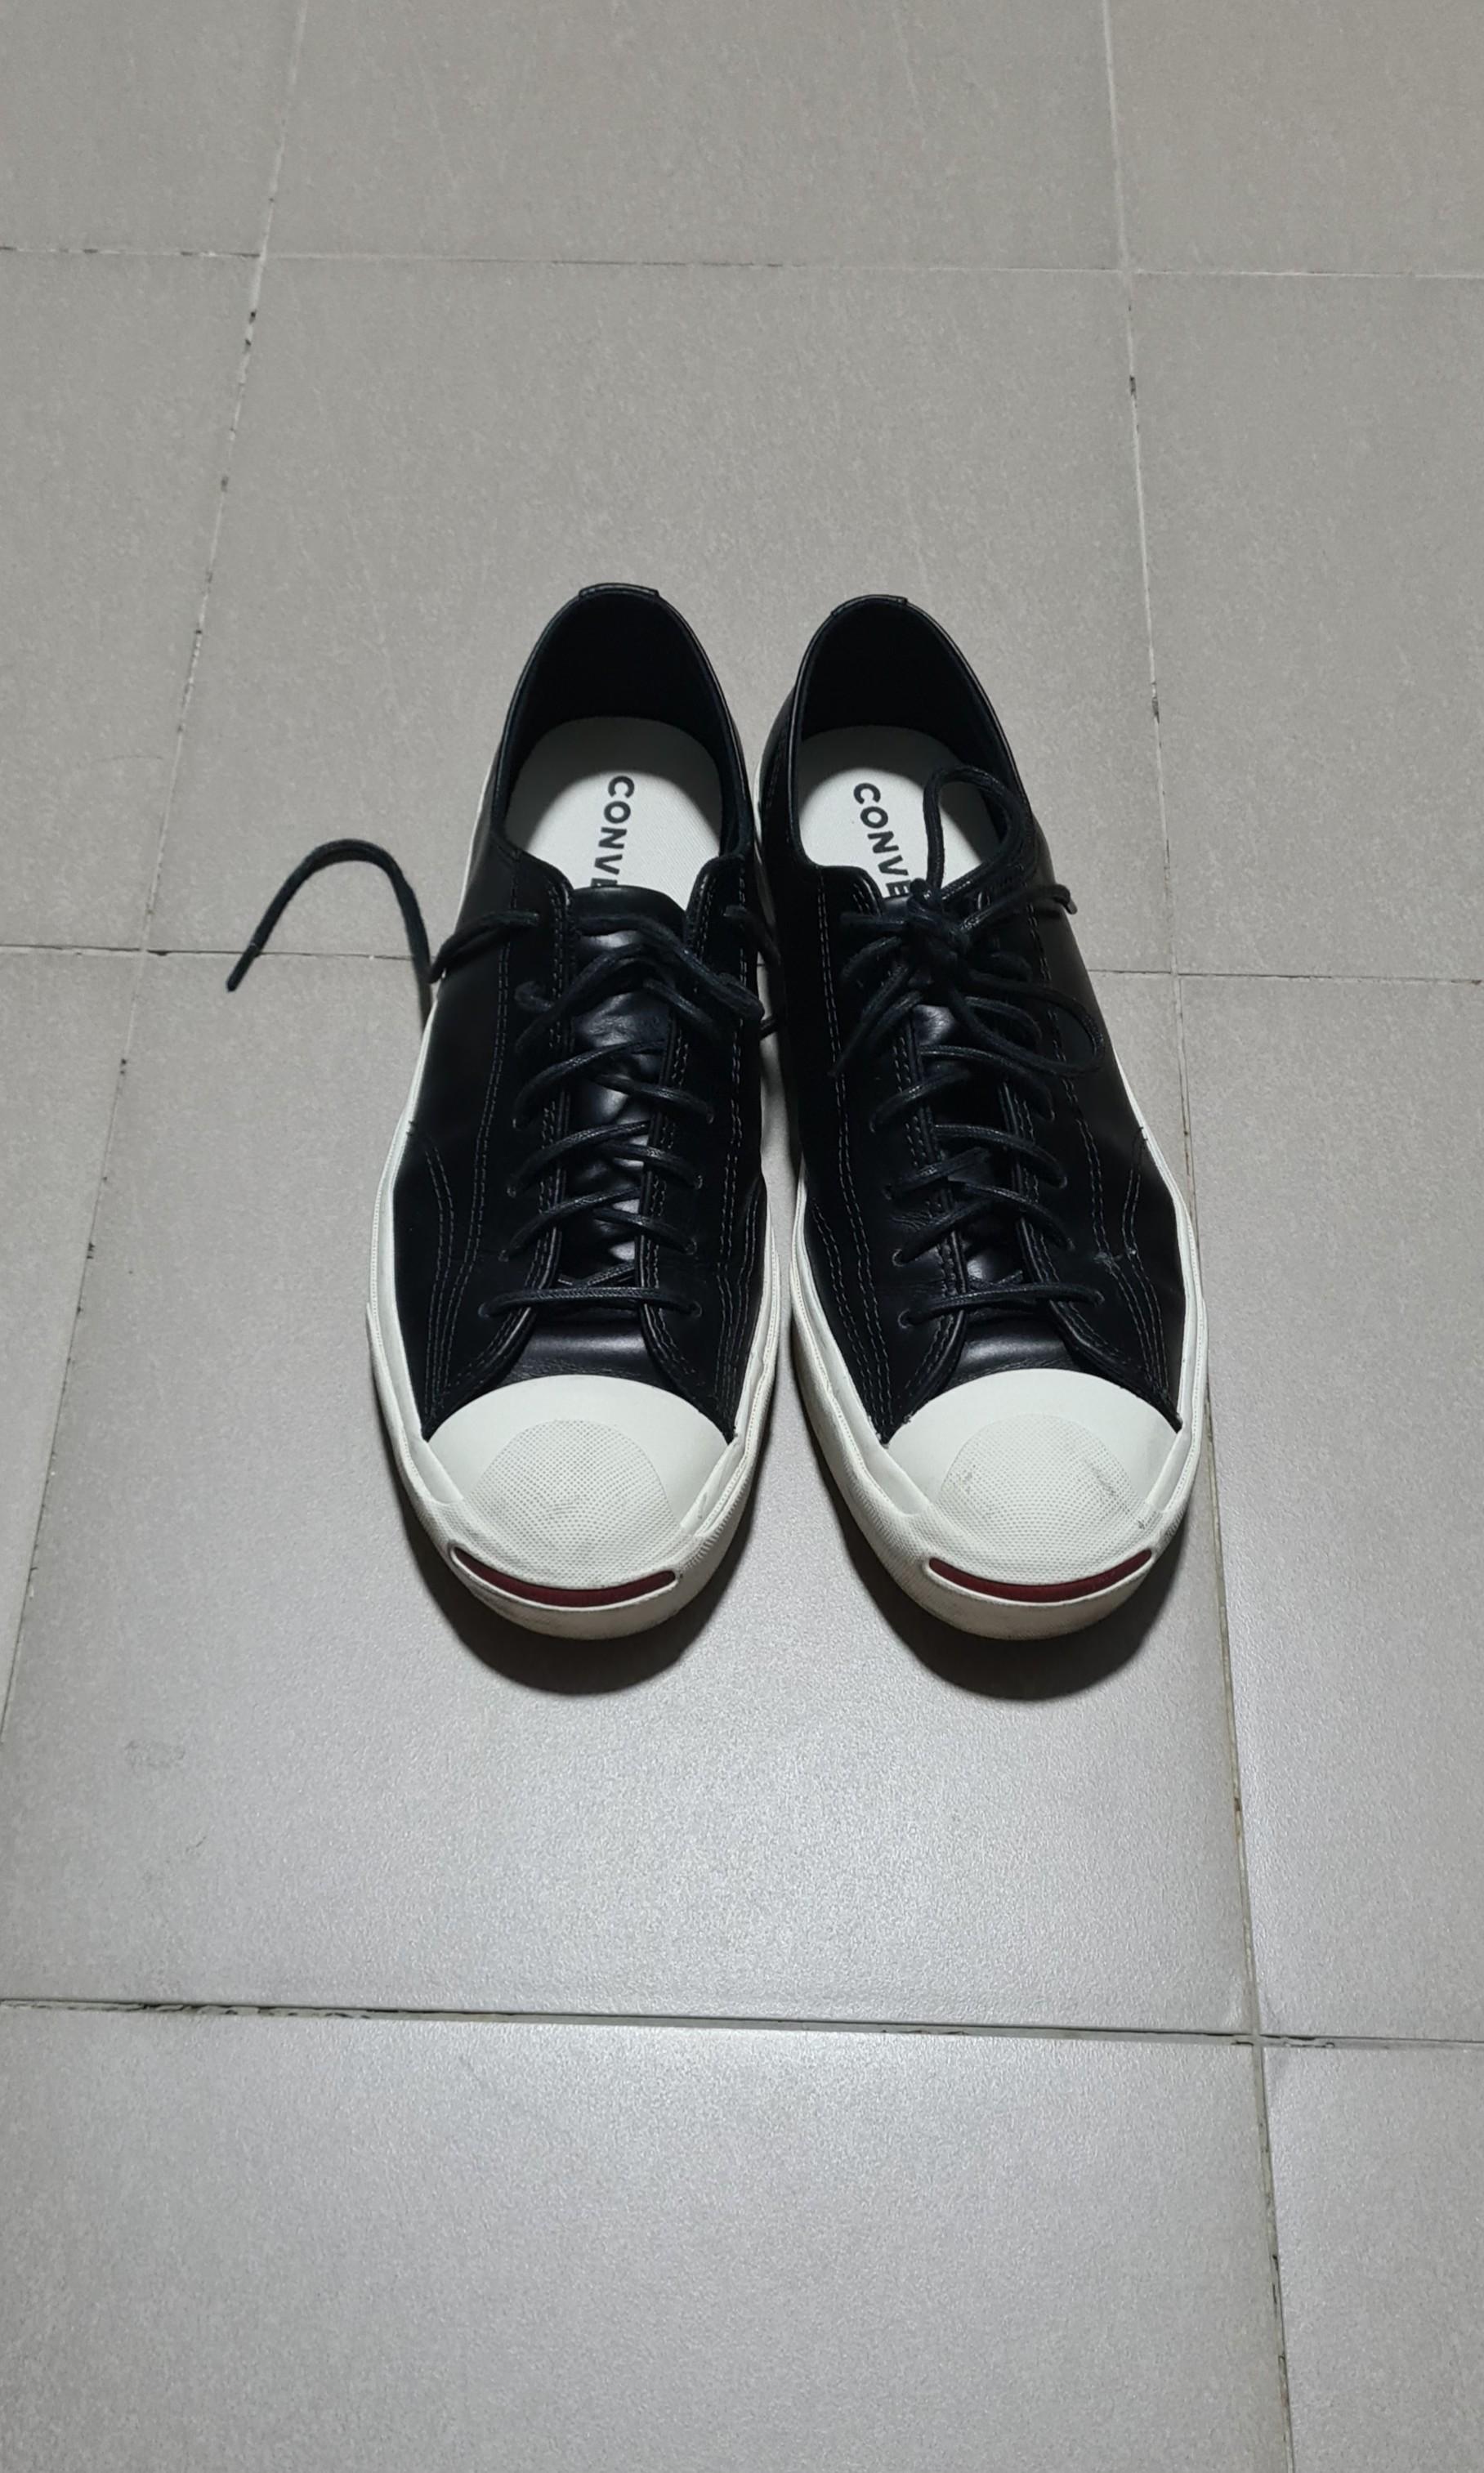 Converse Purcell Leather - Ox - Black/Black/Egret 170098C, Men's Fashion, Footwear, Sneakers on Carousell